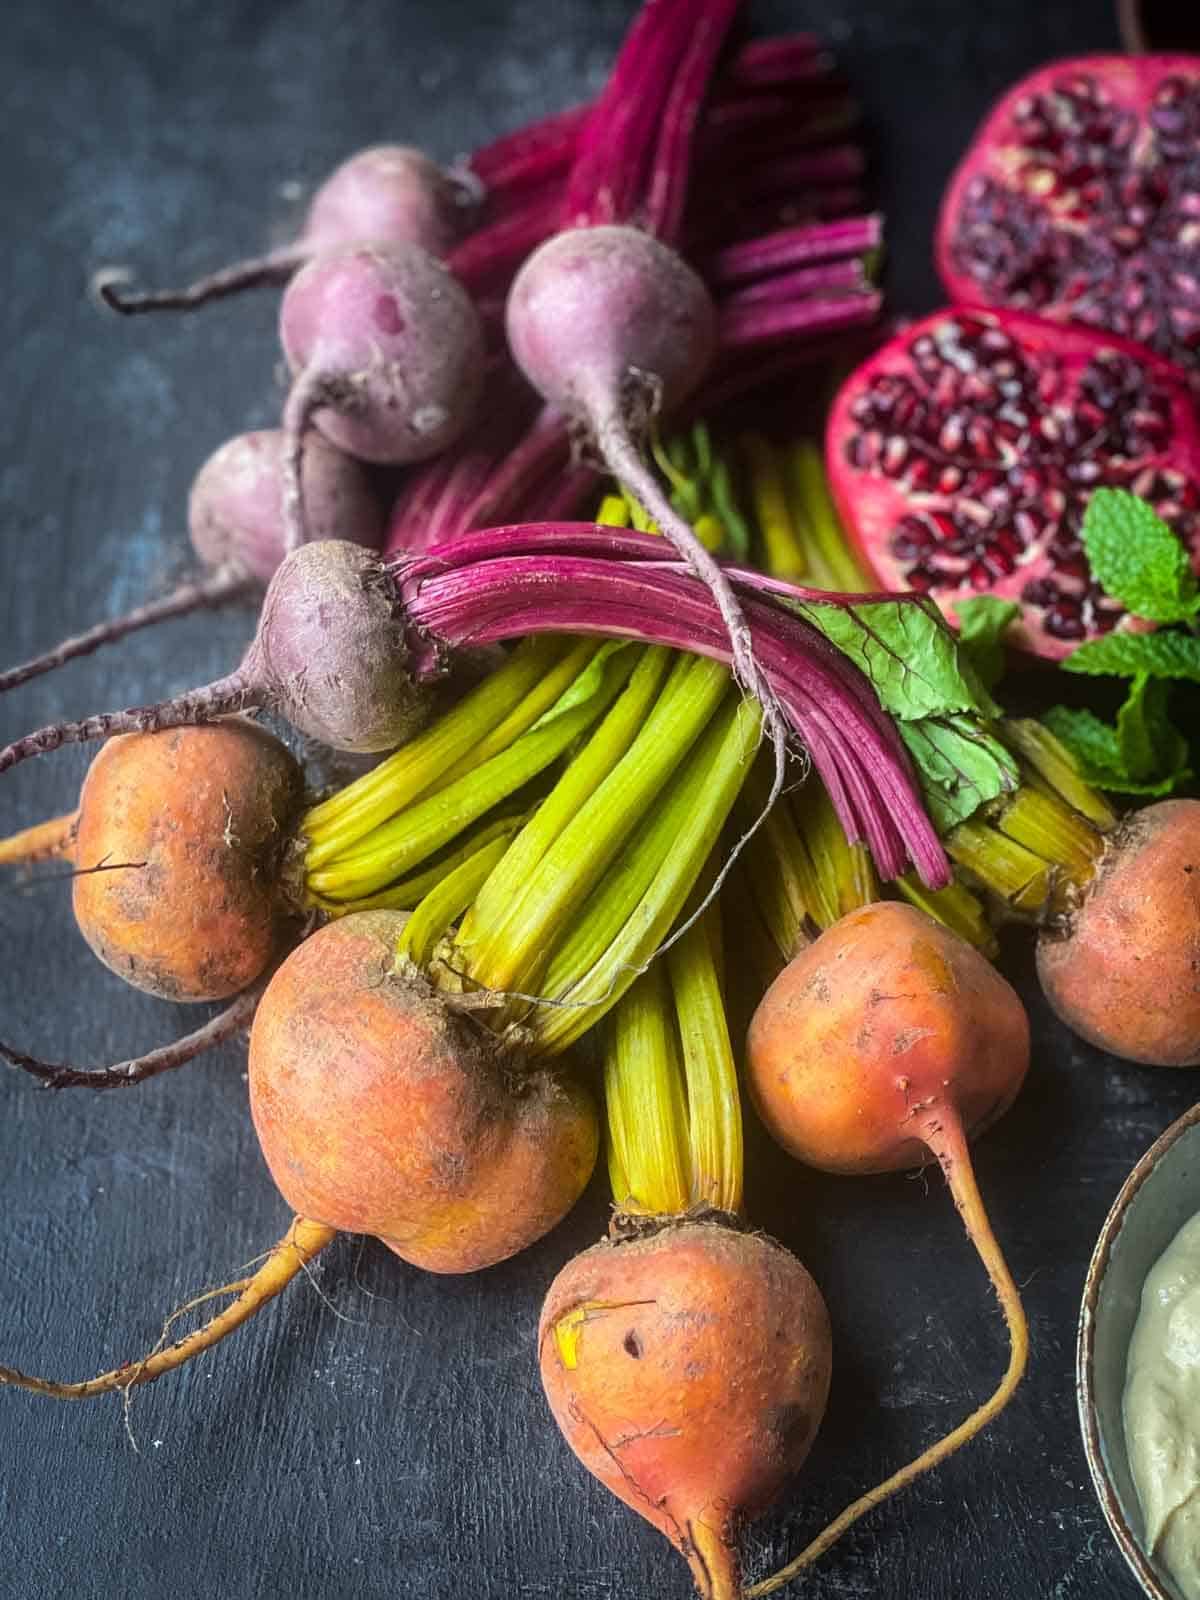 2 bunches of baby beets laid on a black background next to cut pomegranate